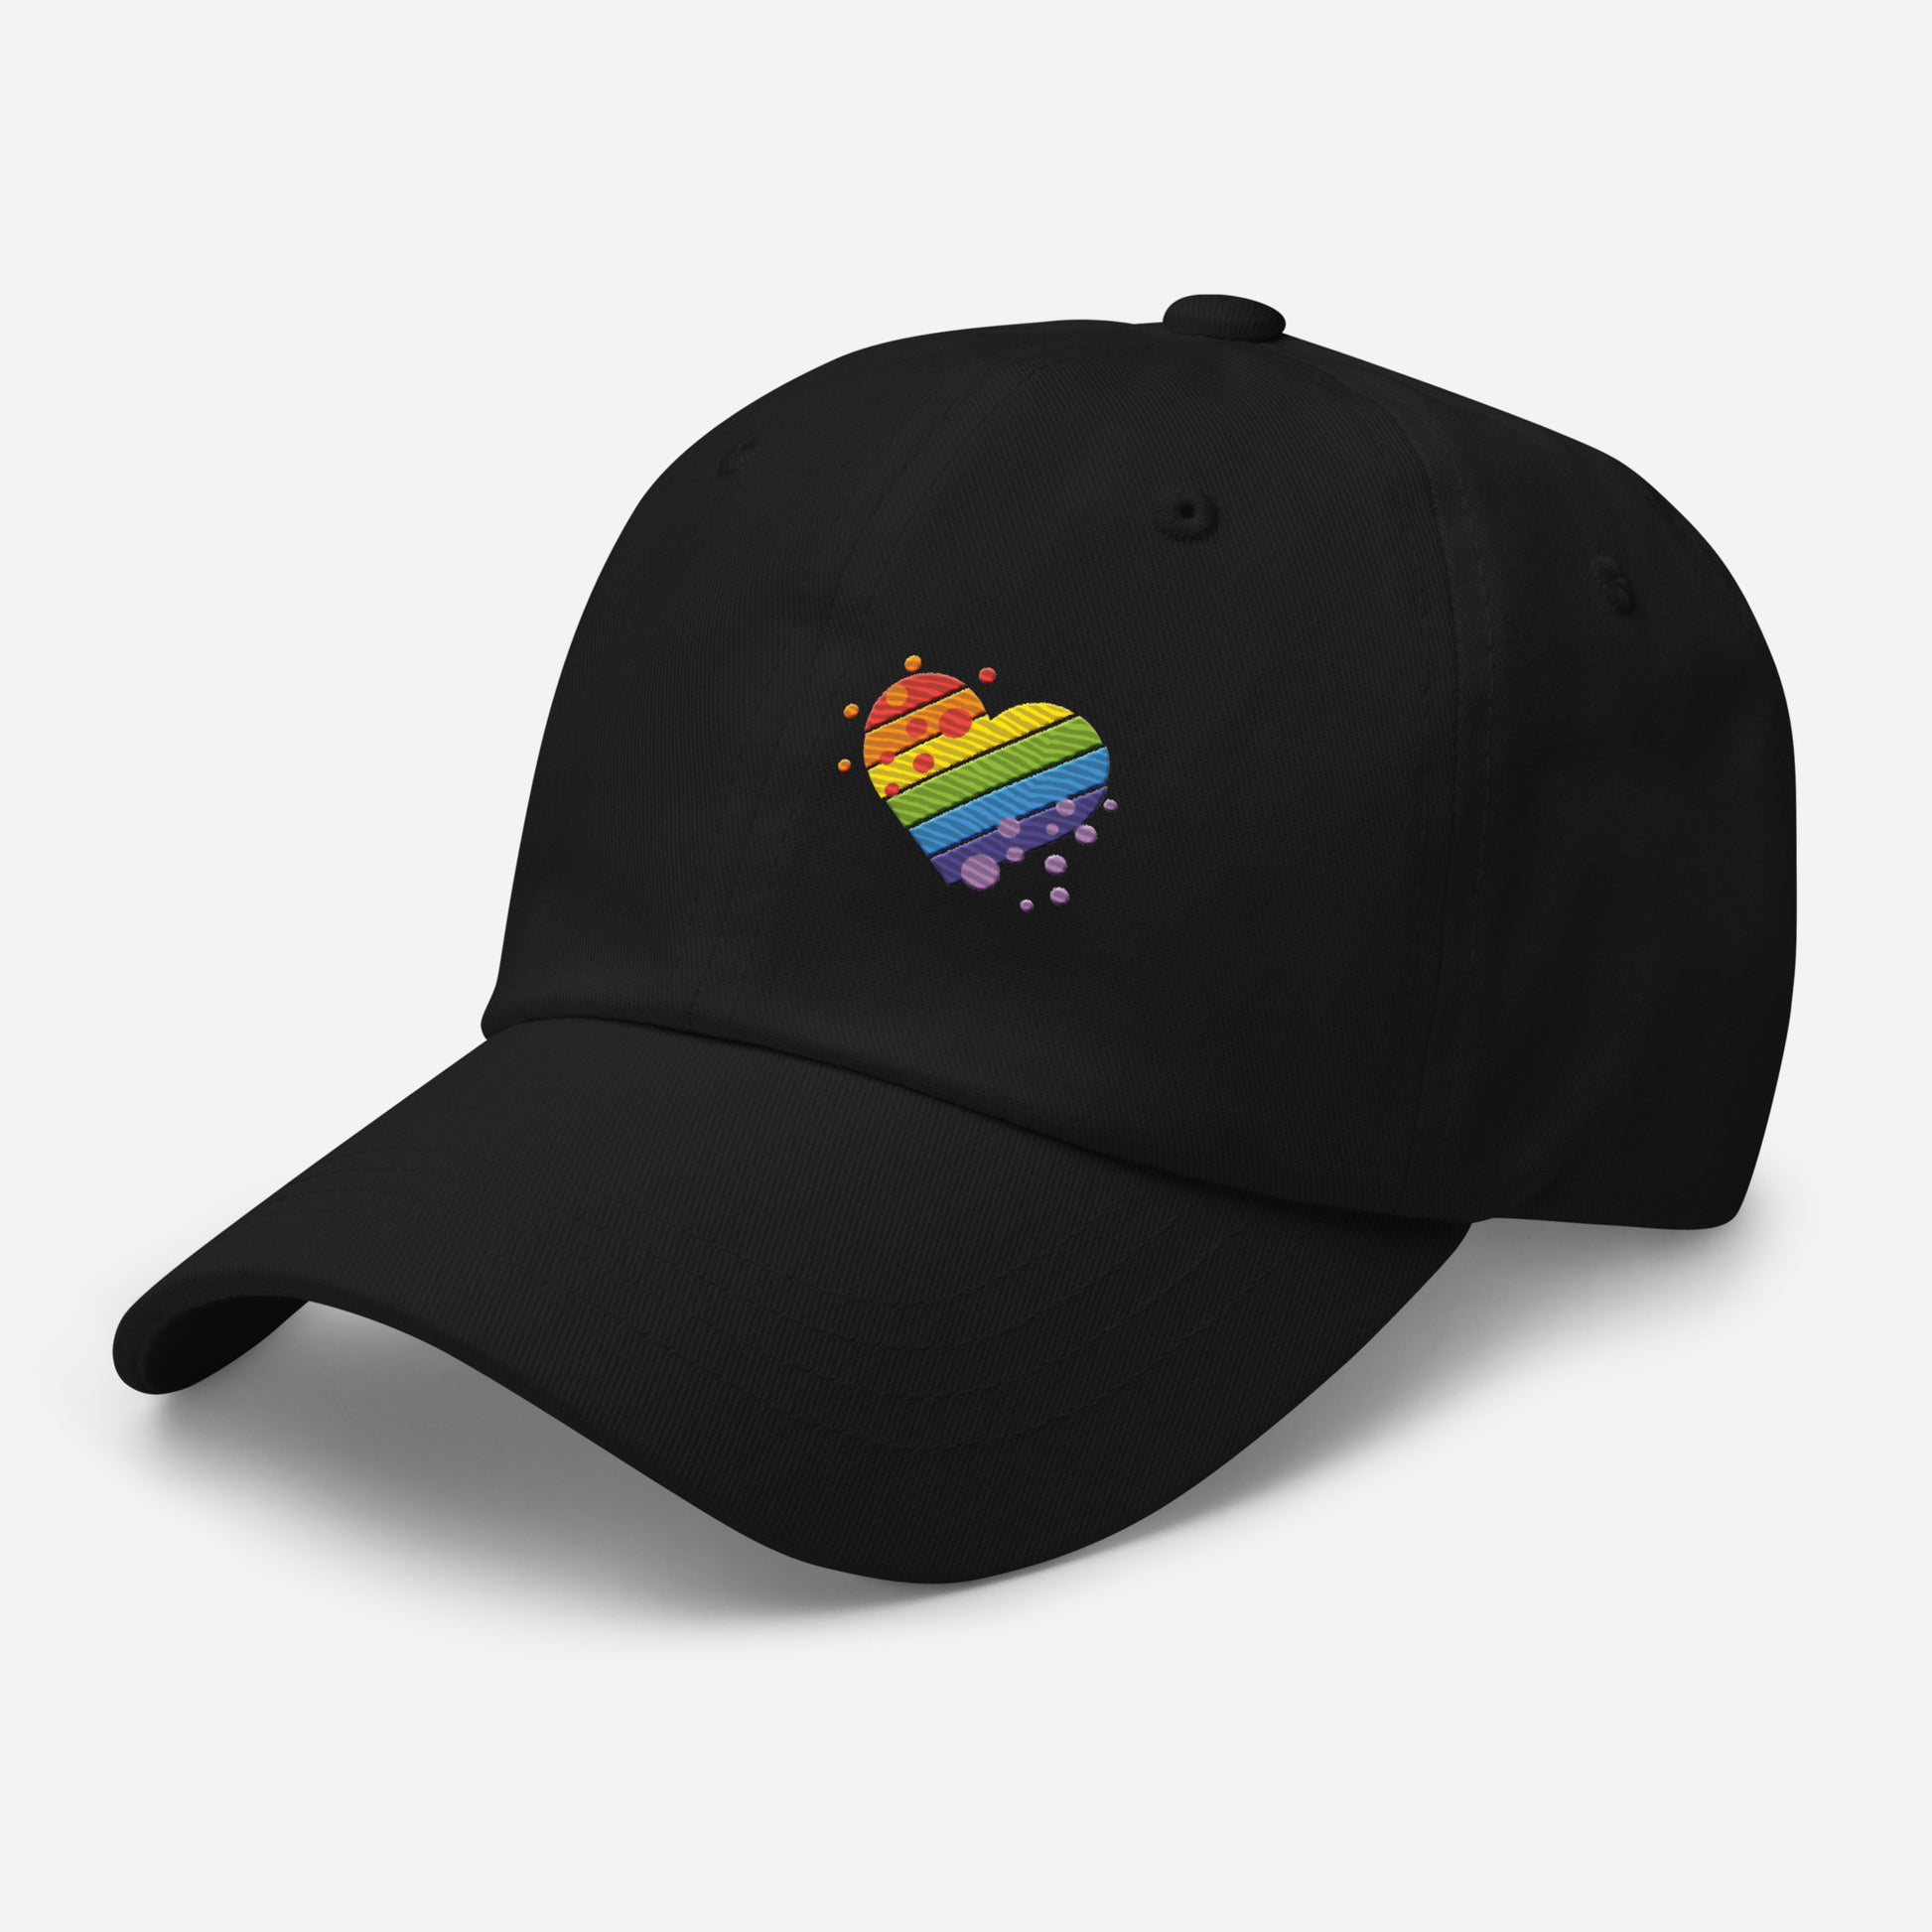 Black baseball hat featuring rainbow heart design embroidery with a low profile, adjustable strap.